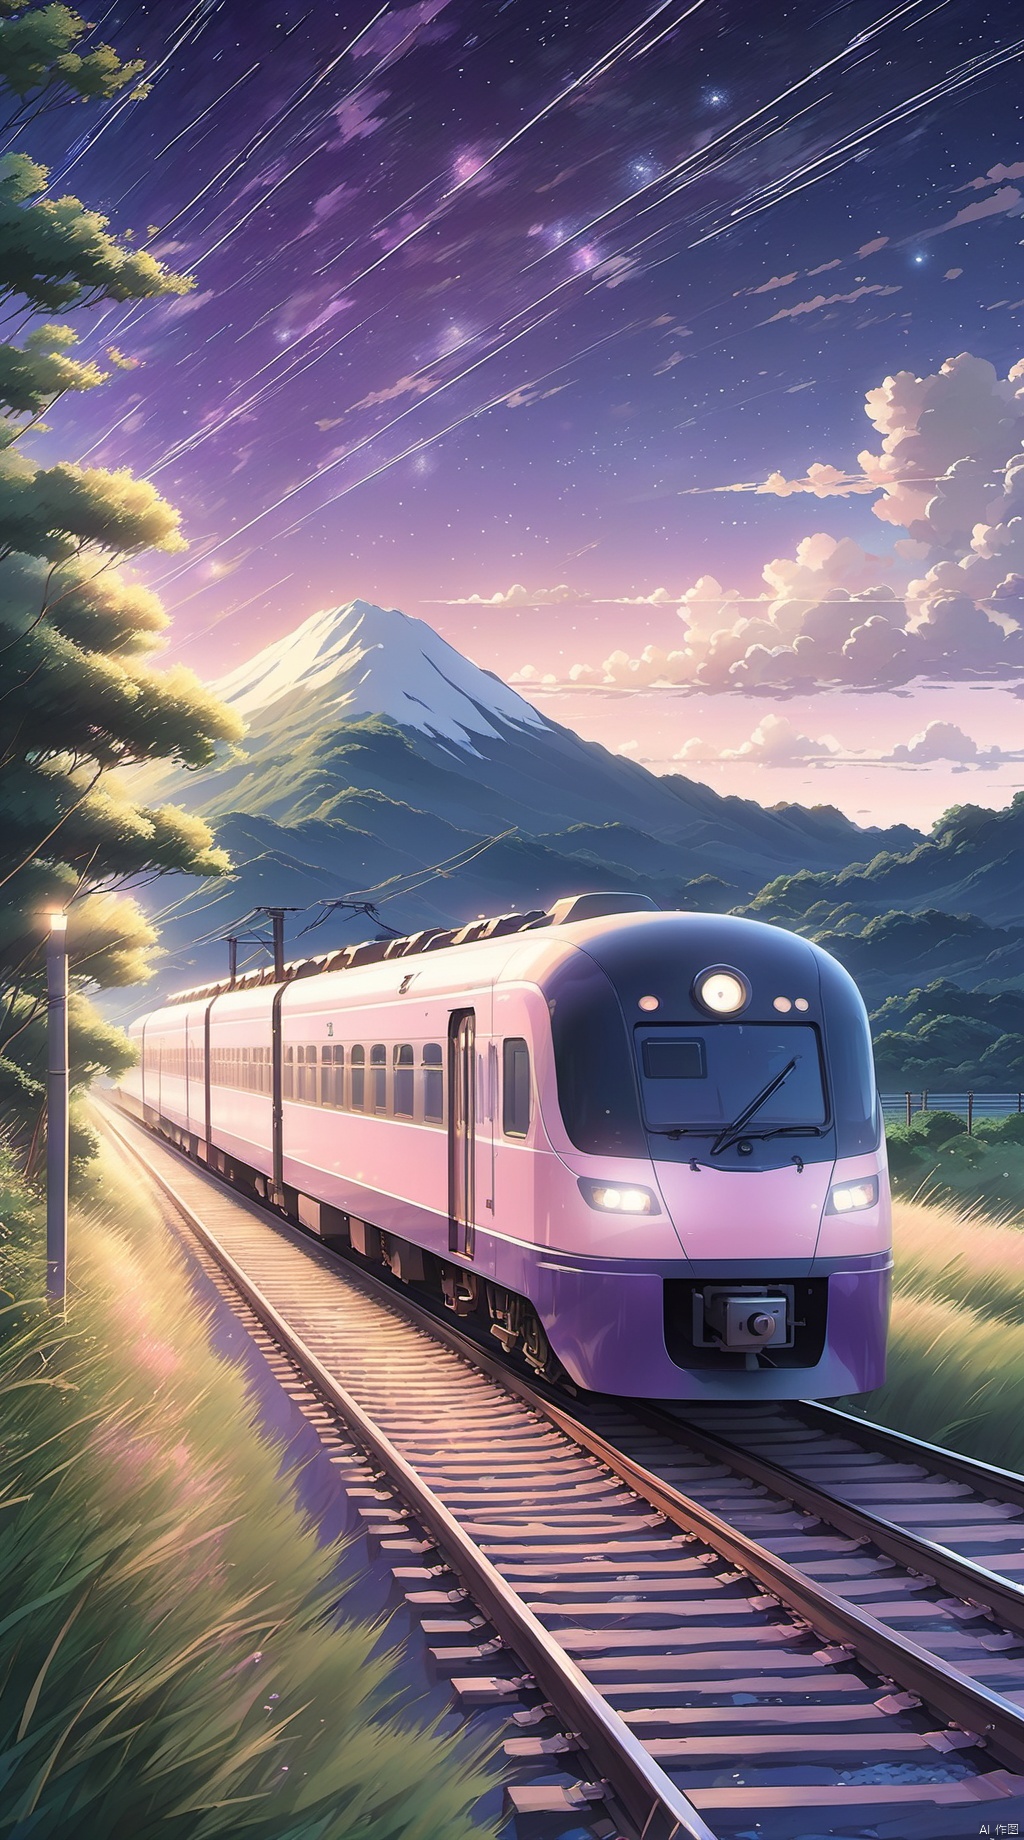 Masterpiece,anime train passing through bodies of water on tracks,purple and pink starry sky,brilliant starry sky. Romantic train,Makoto Shinkai's picture,pixiv,concept art,lofi art style,reflection. by Makoto Shinkai,lofi art,Beautiful anime scene,Anime landscape,detailed scenery ,in style of Makoto shinkai,style of Makoto shinkai,enhanced details